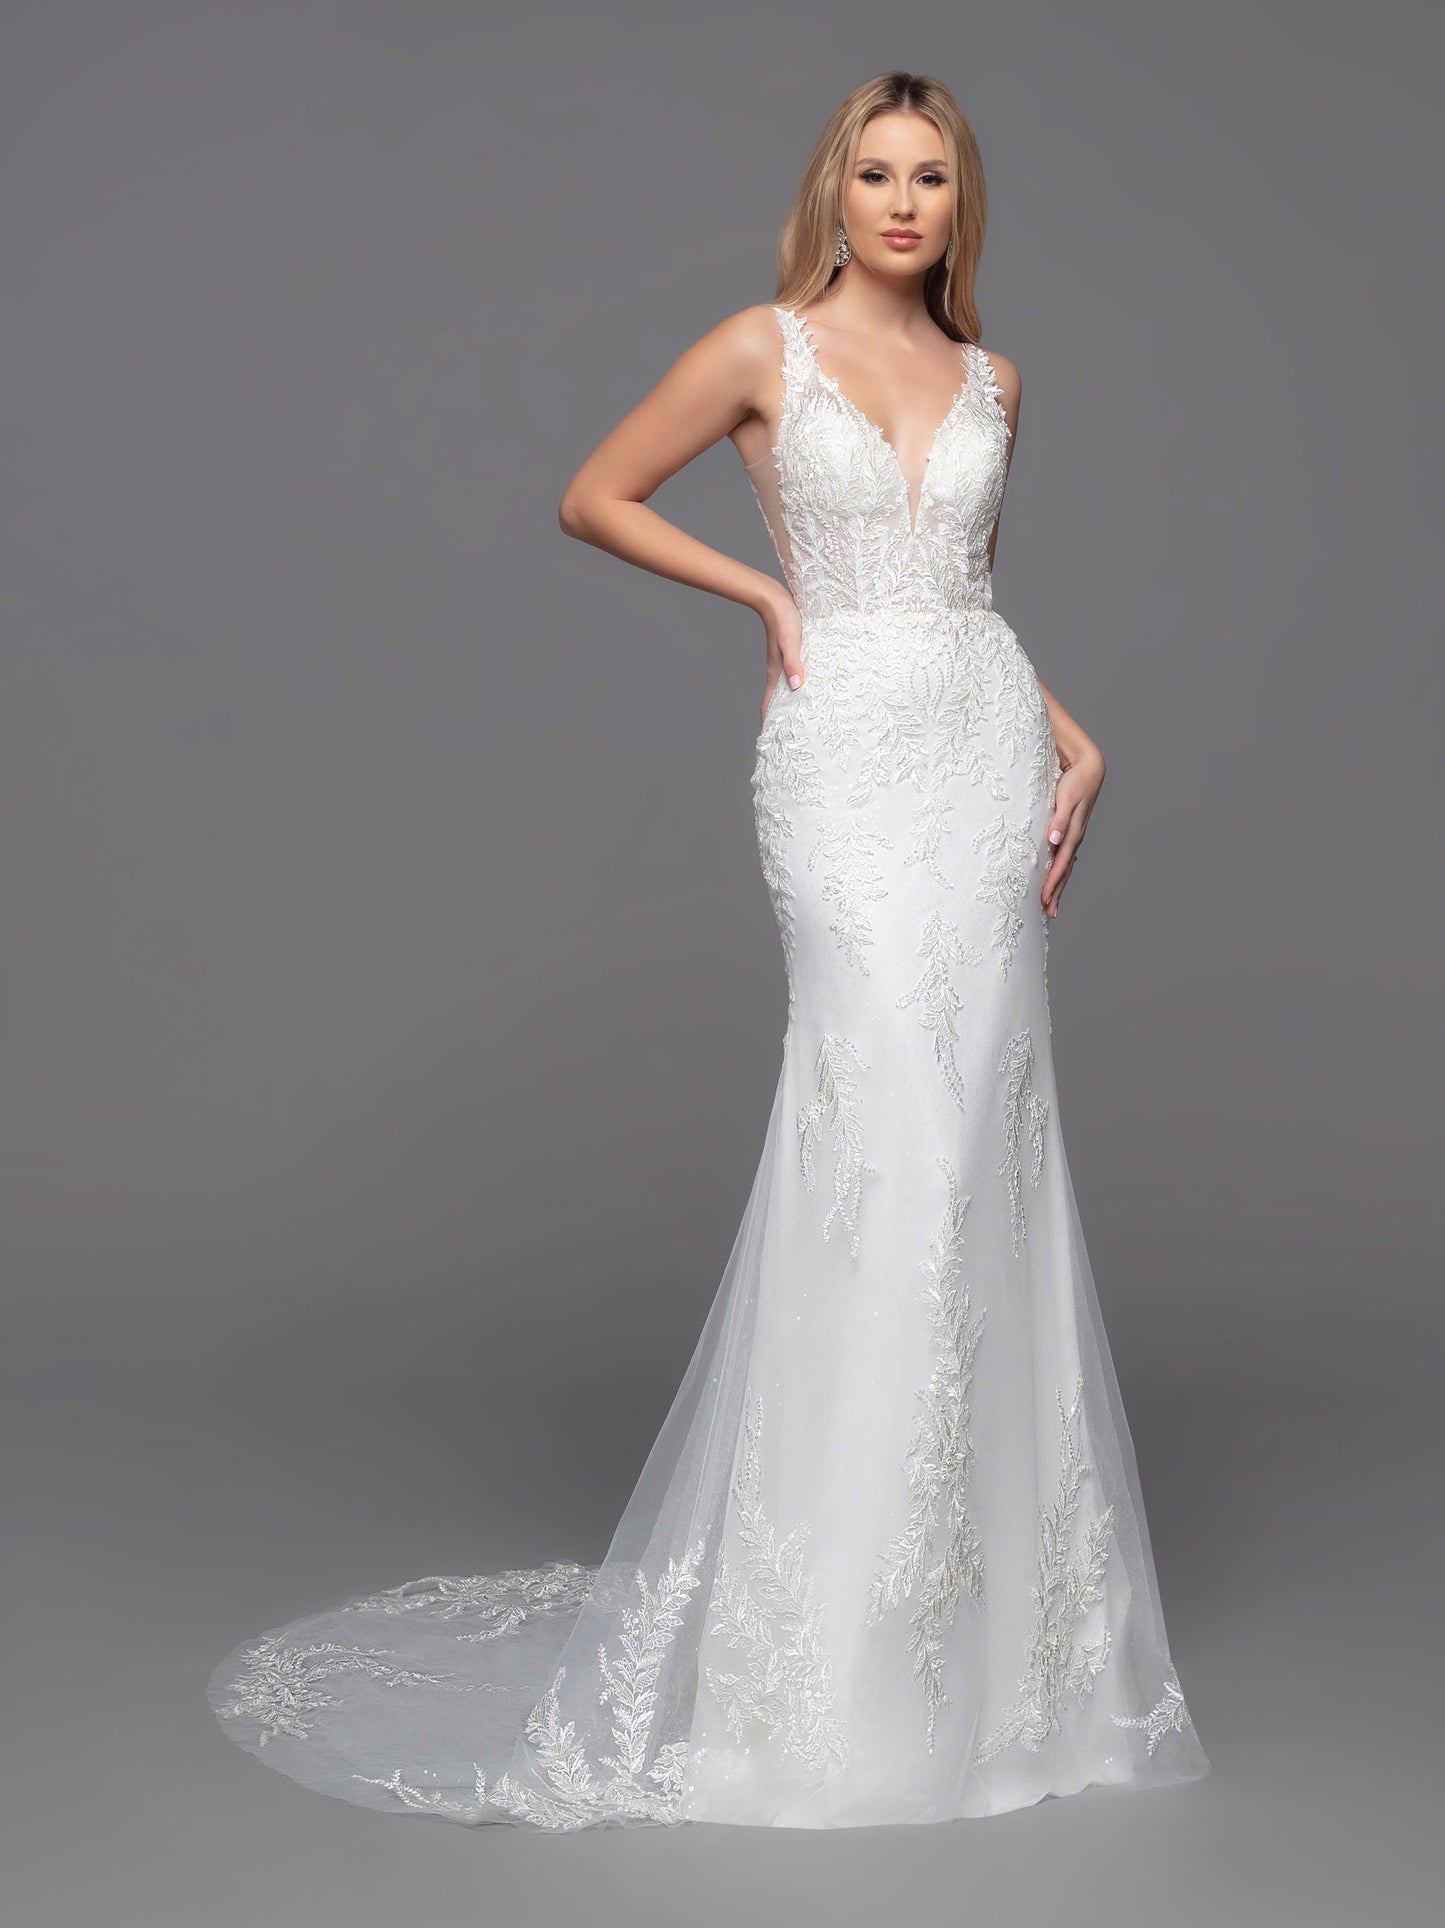 This Davinci Bridal 50822 wedding dress offers an alluring mix of modern elegance and classic sophistication. The sheer lace bodice is perfectly complemented by the beaded sequin and lace applique accents on the floor-length skirt lining and sheer chapel train. The deep V-neck & back and sheer side panels flatter any figure. Make an unforgettable statement on your special day.  Sizes: 2-20  Colors: Ivory